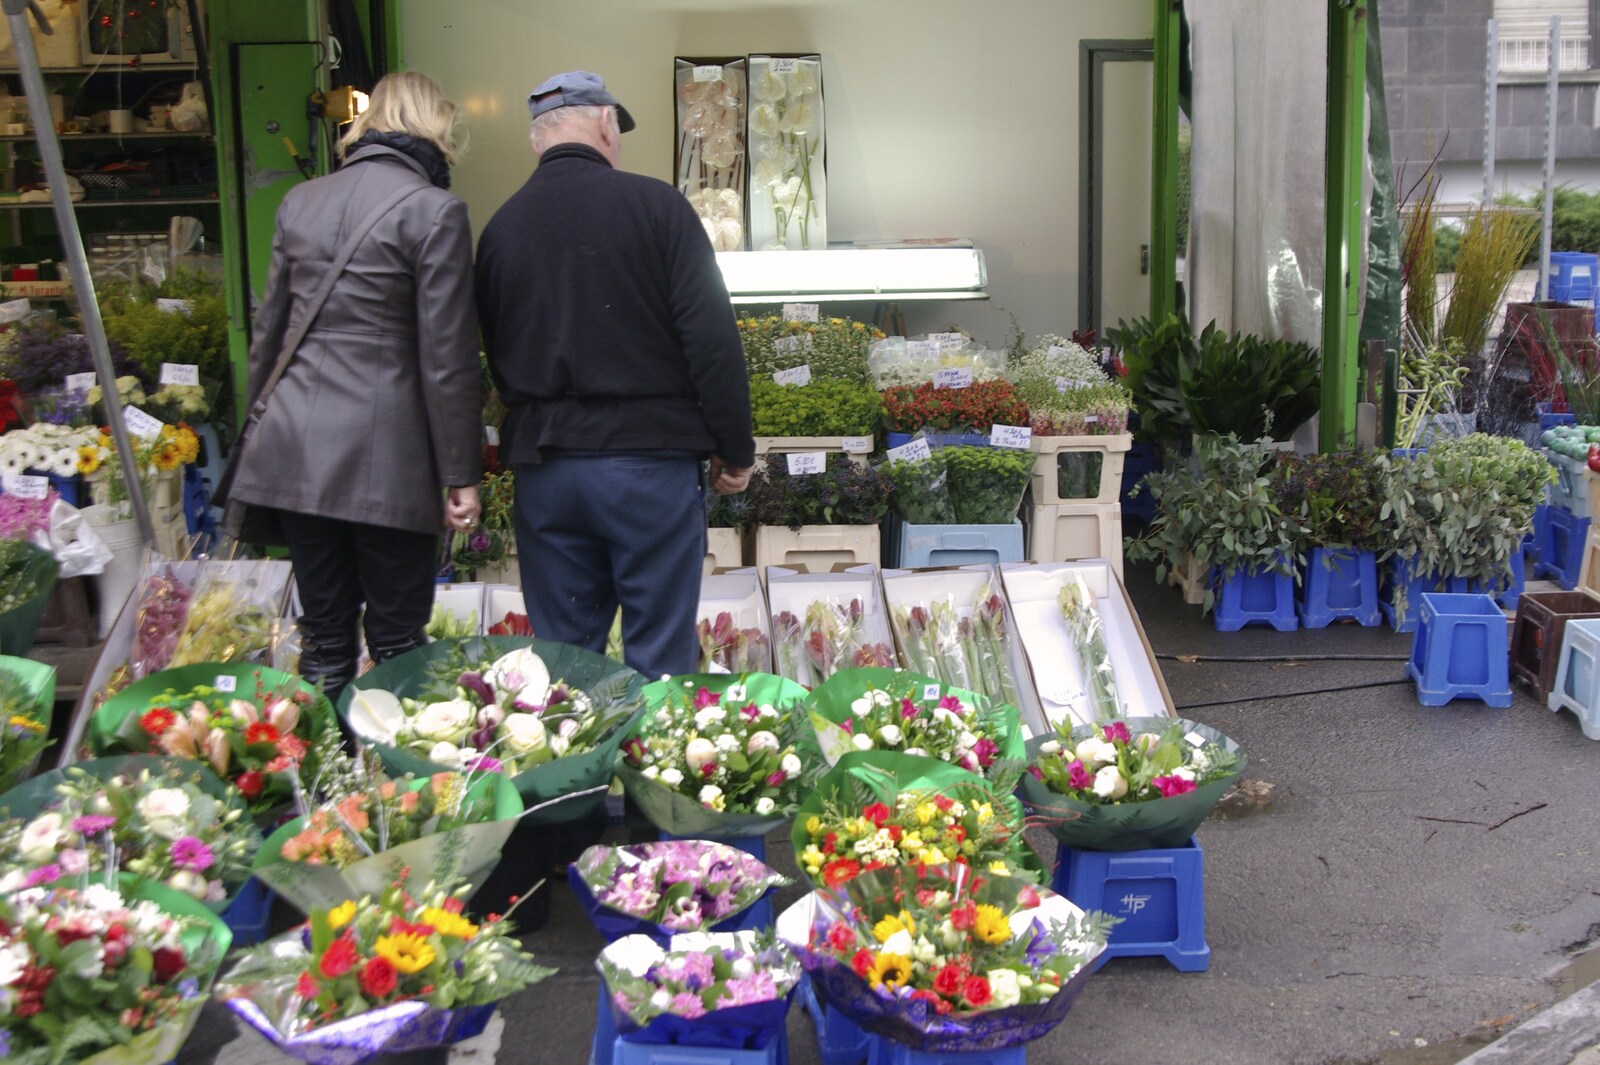 A flower stall from The Christmas Markets of Brussels, Belgium - 1st January 2007